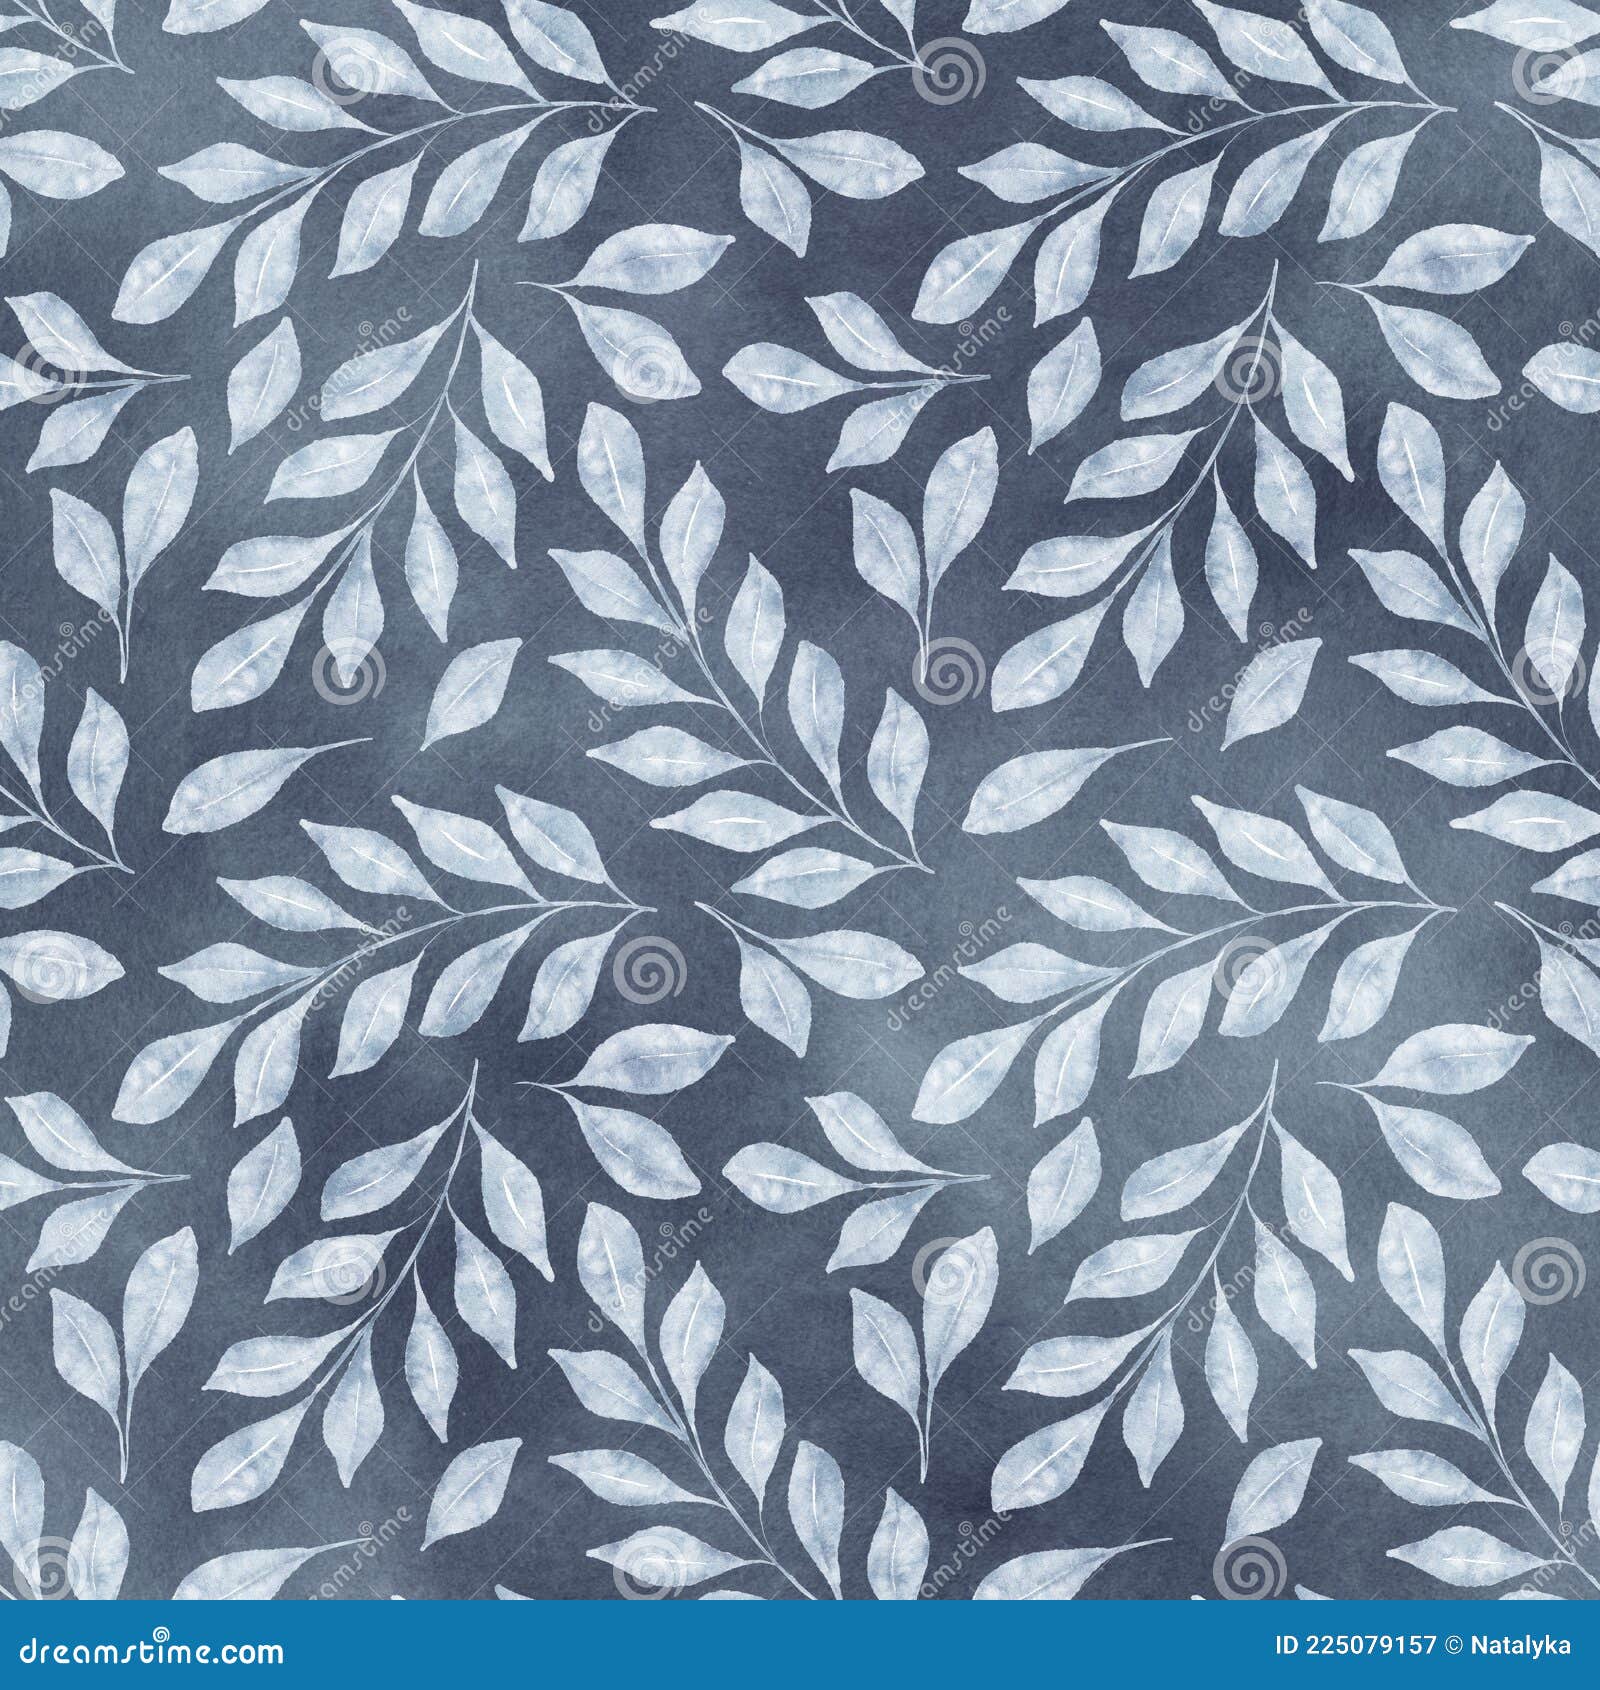 Watercolor Floral Seamless Pattern with Blue Leaves and Branches on ...